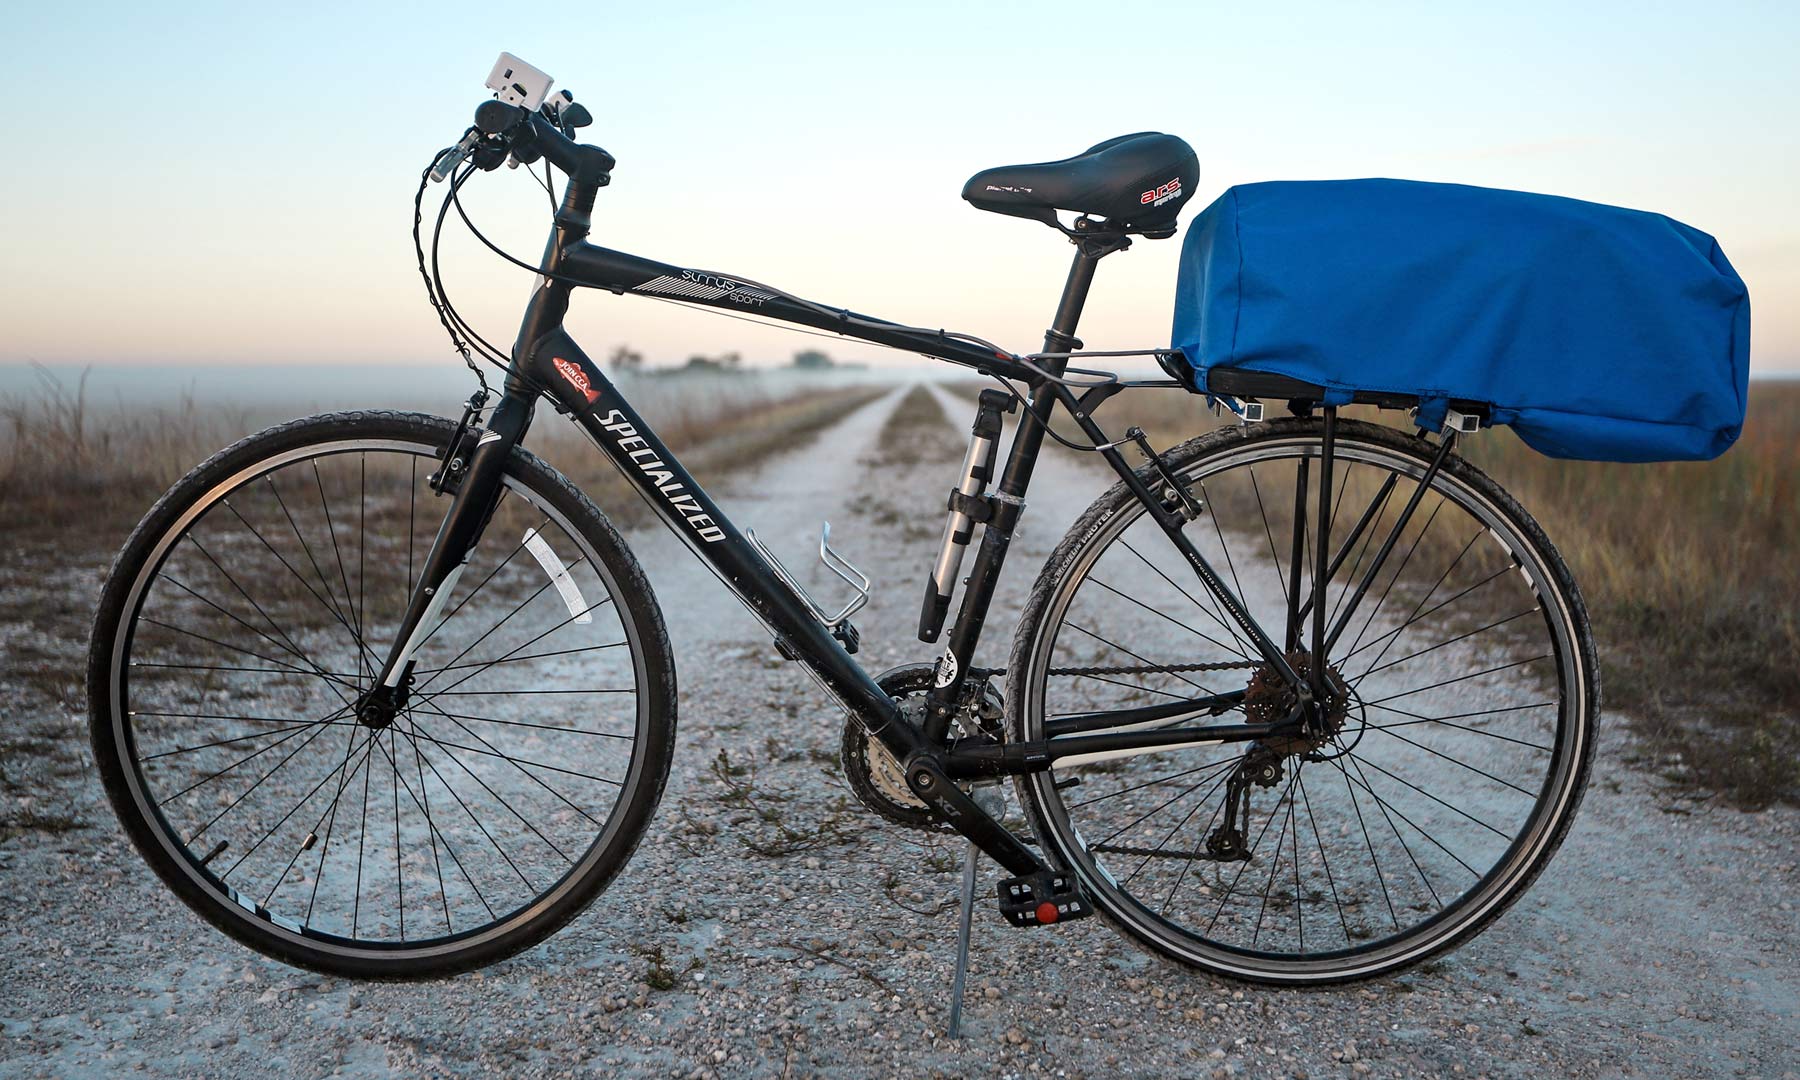 CycleWing-bike-sail_collapsible-rack-mounted-wind-powered-bicycle-sail_packed.jpg